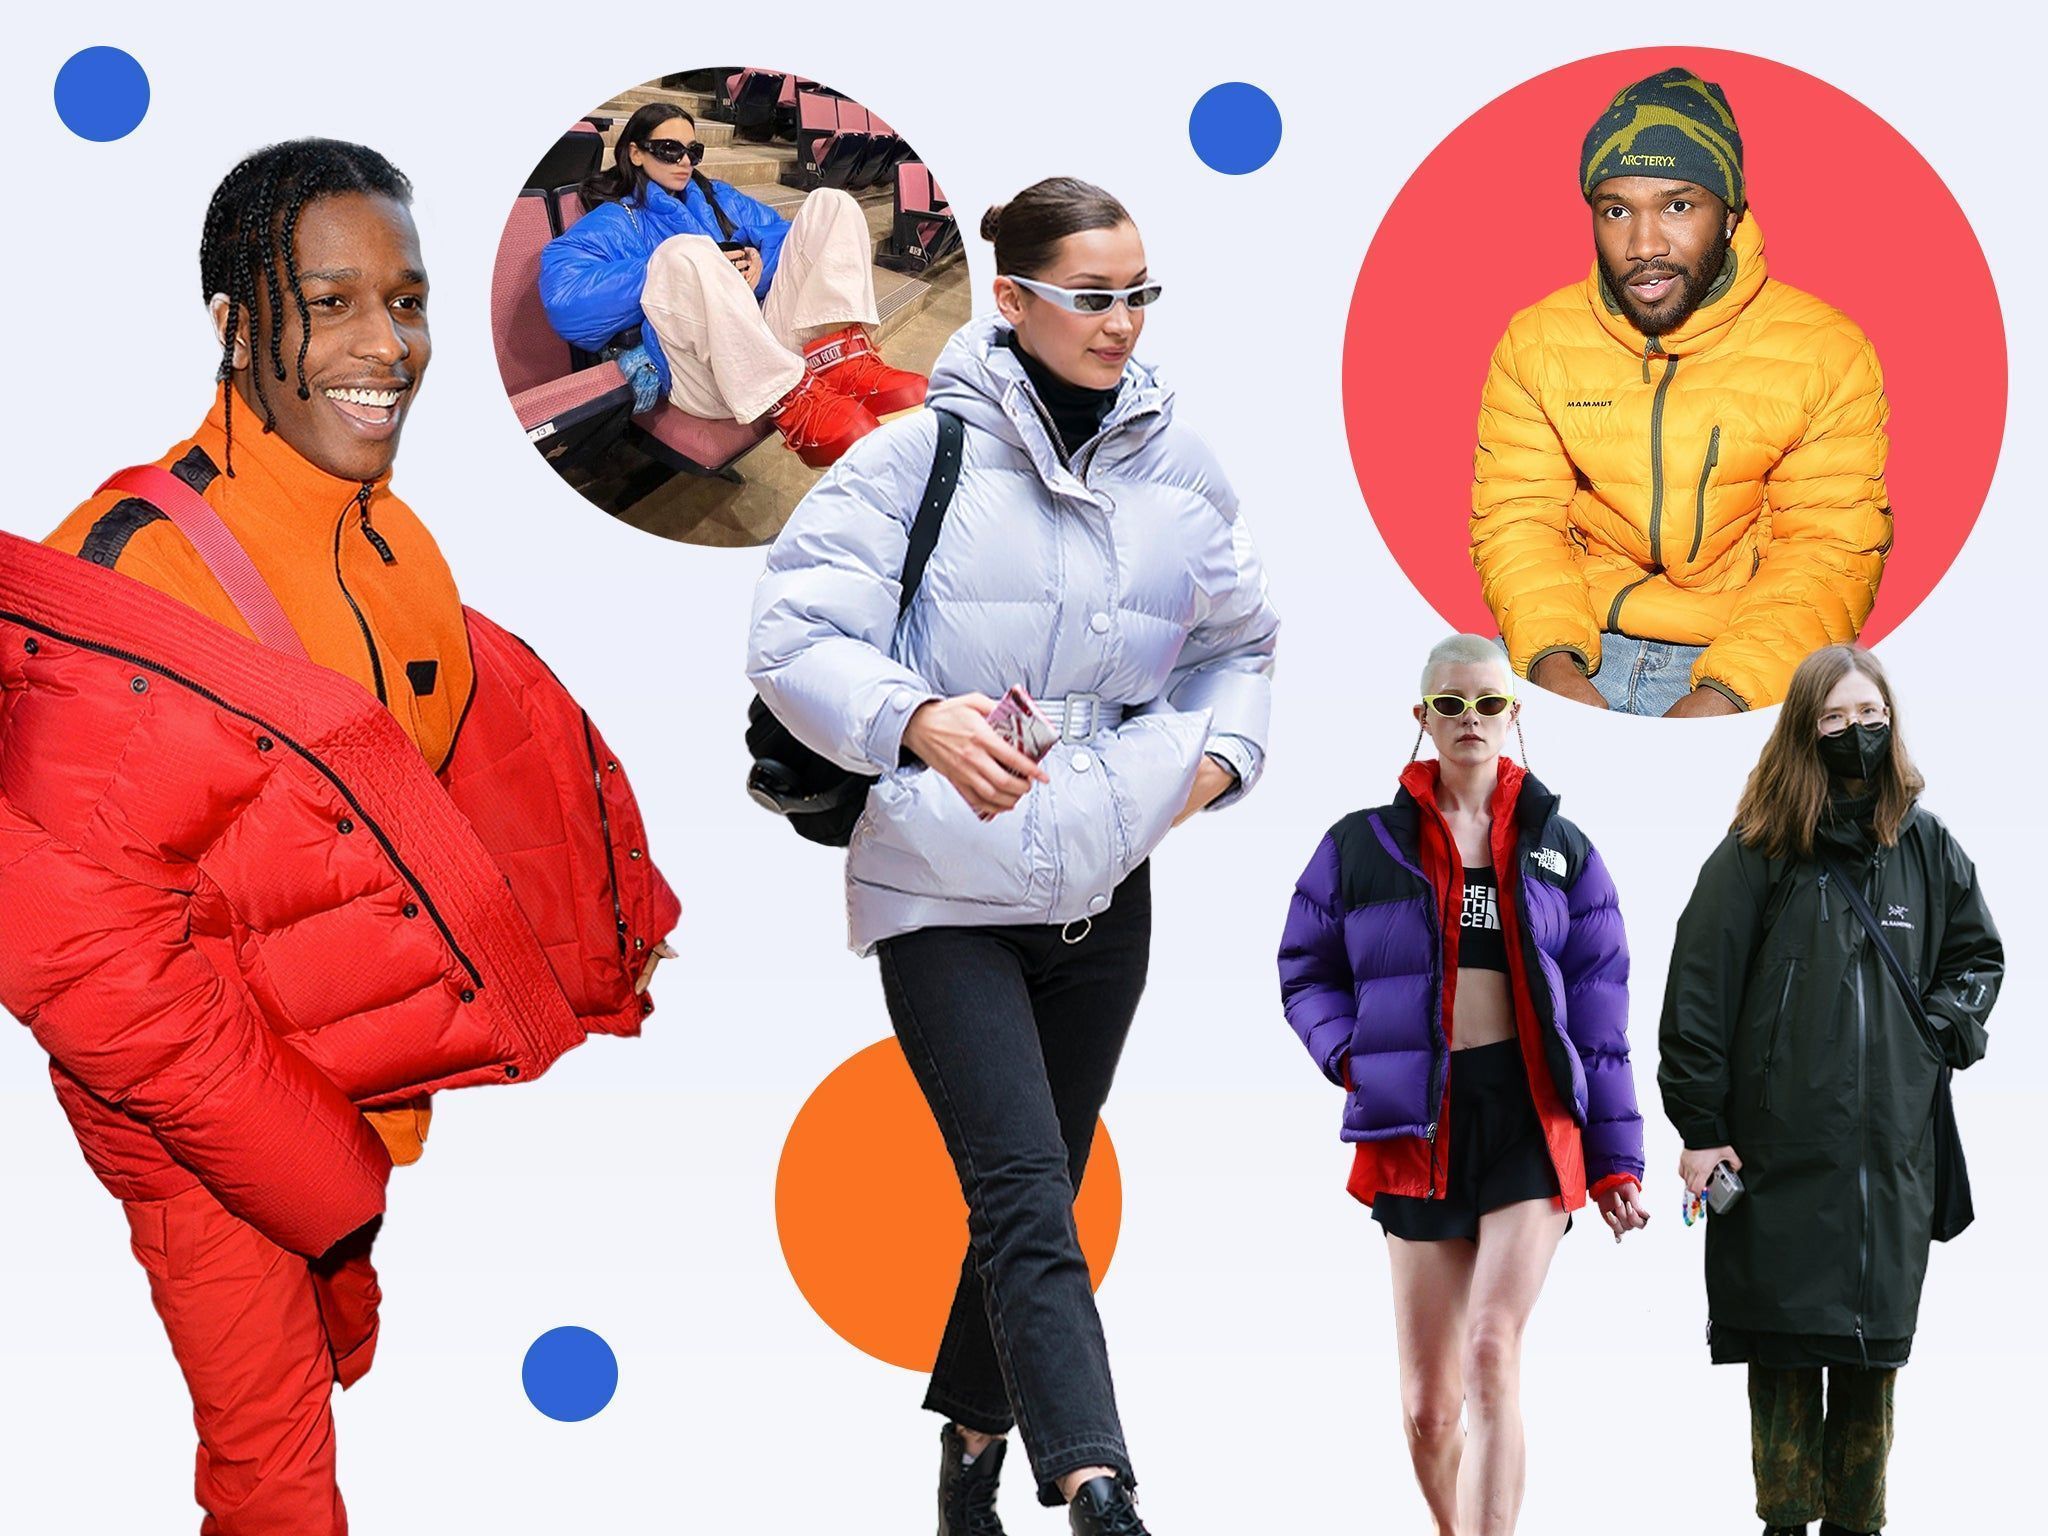 Gorpcore: Technical outerwear trend surges in popularity, according to fashion data platform